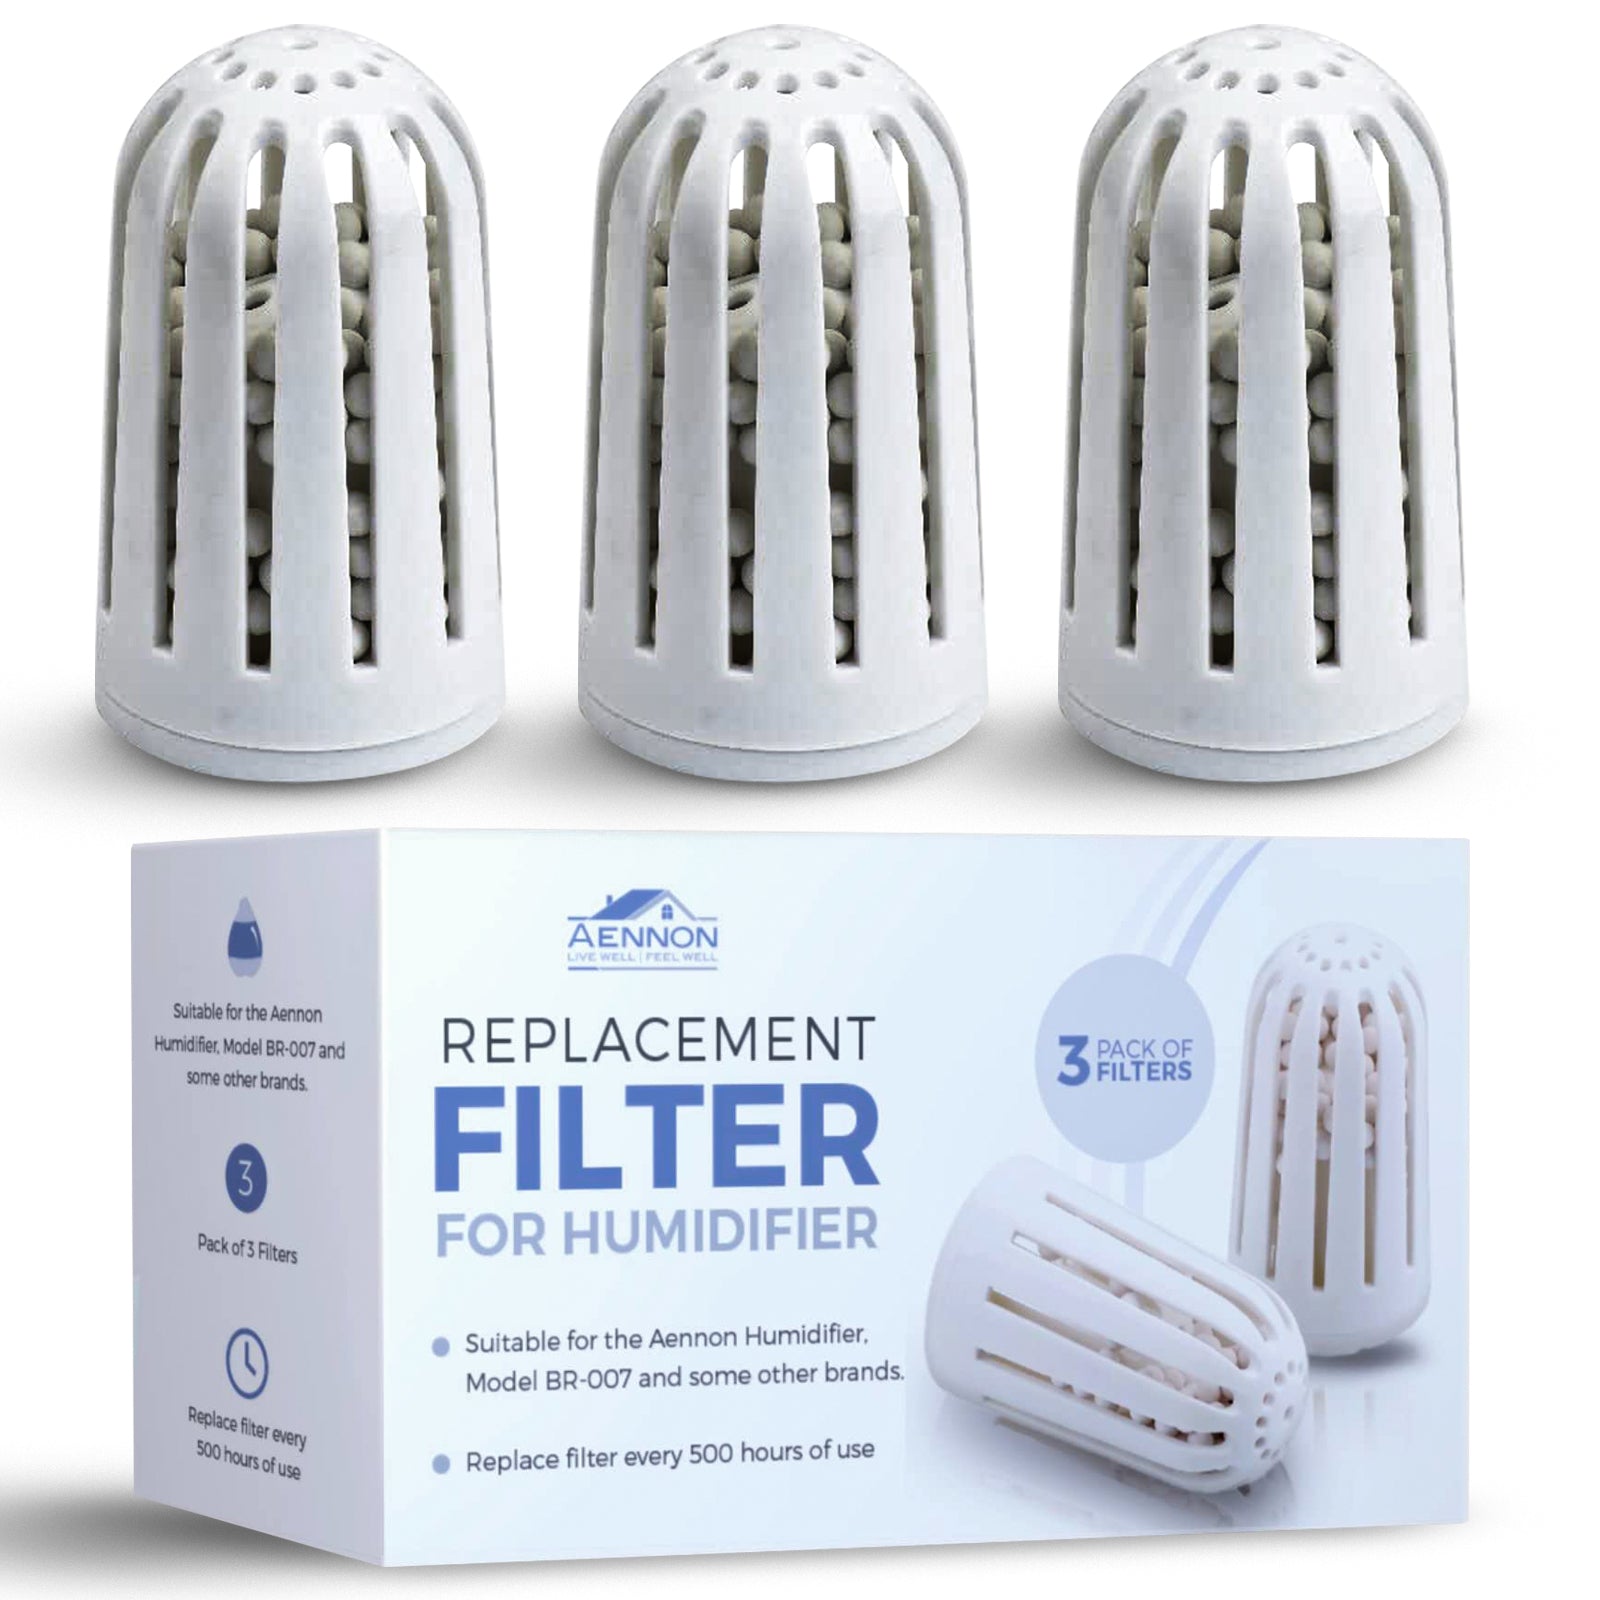 Replacement Filters For Cool Mist Ultrasonic Humidifier - Ceramic Water Filter Parts For Humidifiers - Works For Many Other Brands As Well (3-Pack)